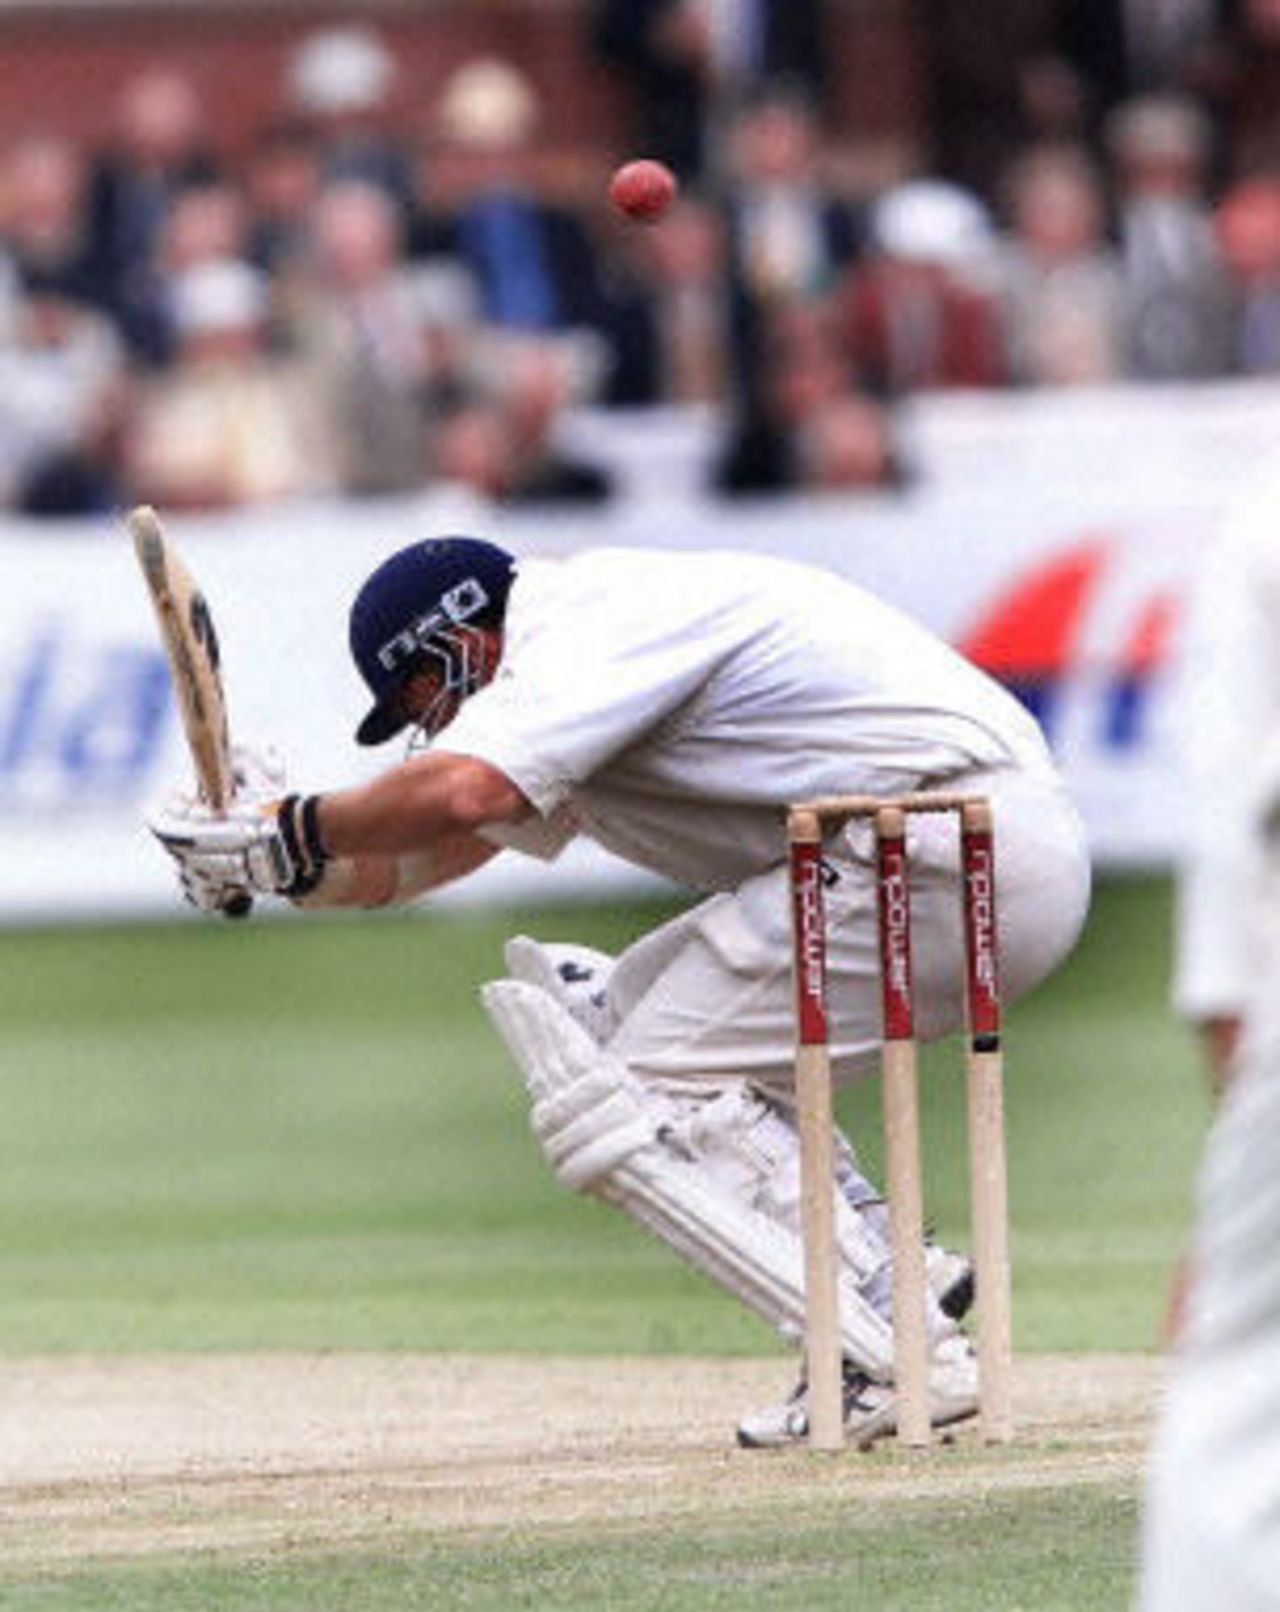 Cork ducks under the ball, day 3, 1st Test at Lord's, 17-21 May 2001.